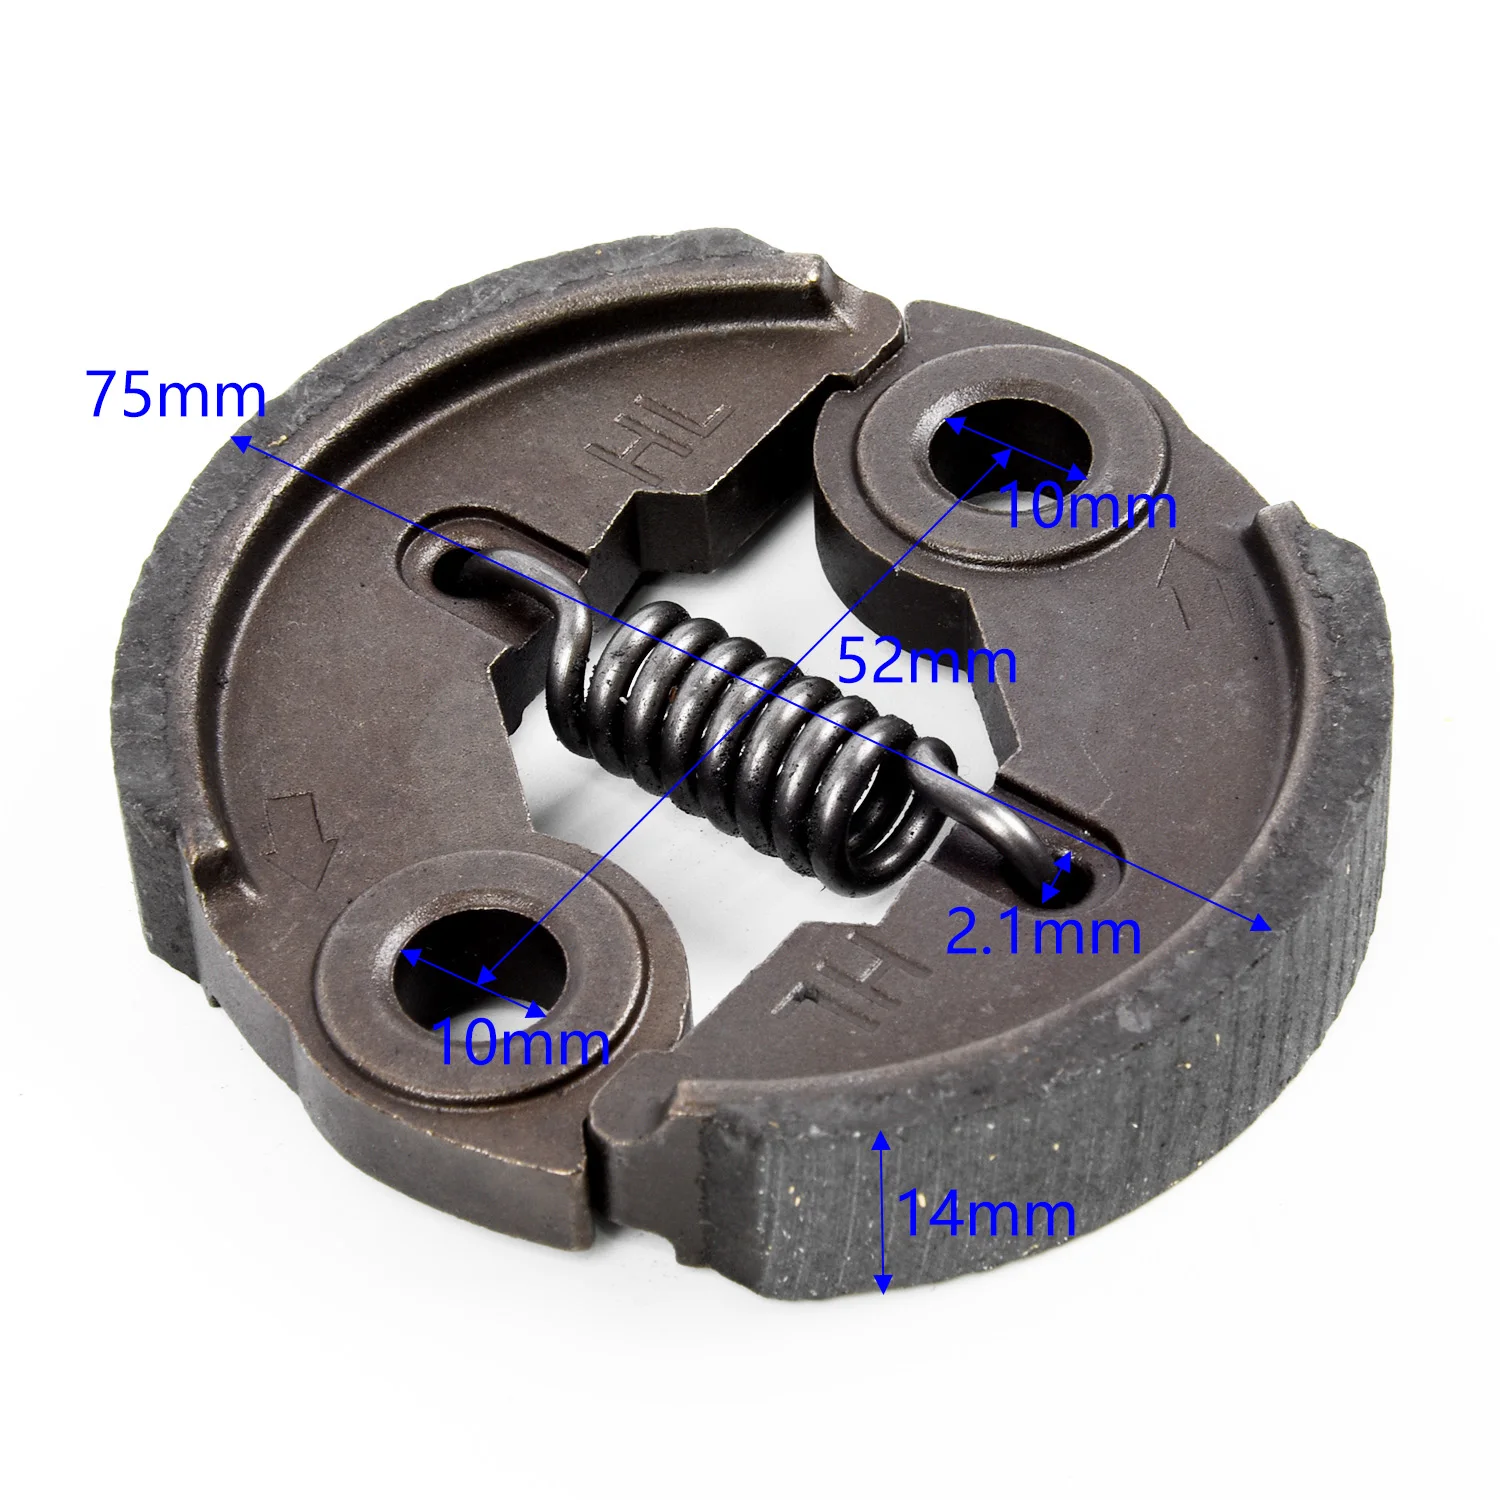 clutch bolt washer kit fit for honda gx31 gx35 gx35nt fg100 hht31s hhe31c mower part replacement garden clutch supplies free global shipping